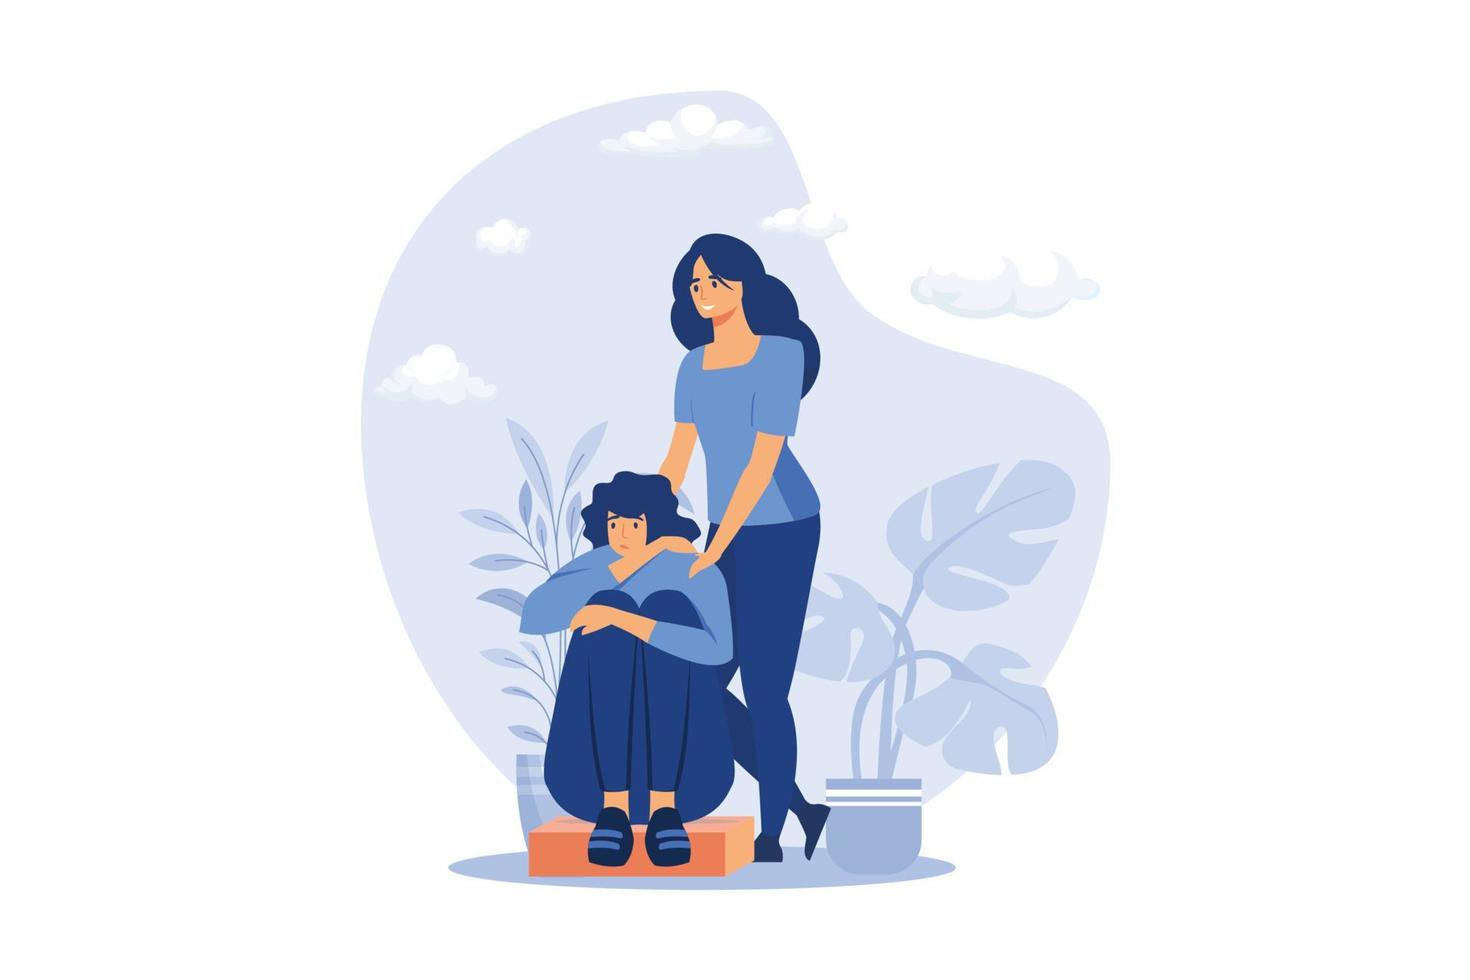 Woman giving comfort and support to friend, keeping palms on her shoulder. Girl feeling stress, loneliness, anxiety. counseling, empathy, psychotherapy, friendship concept. vector